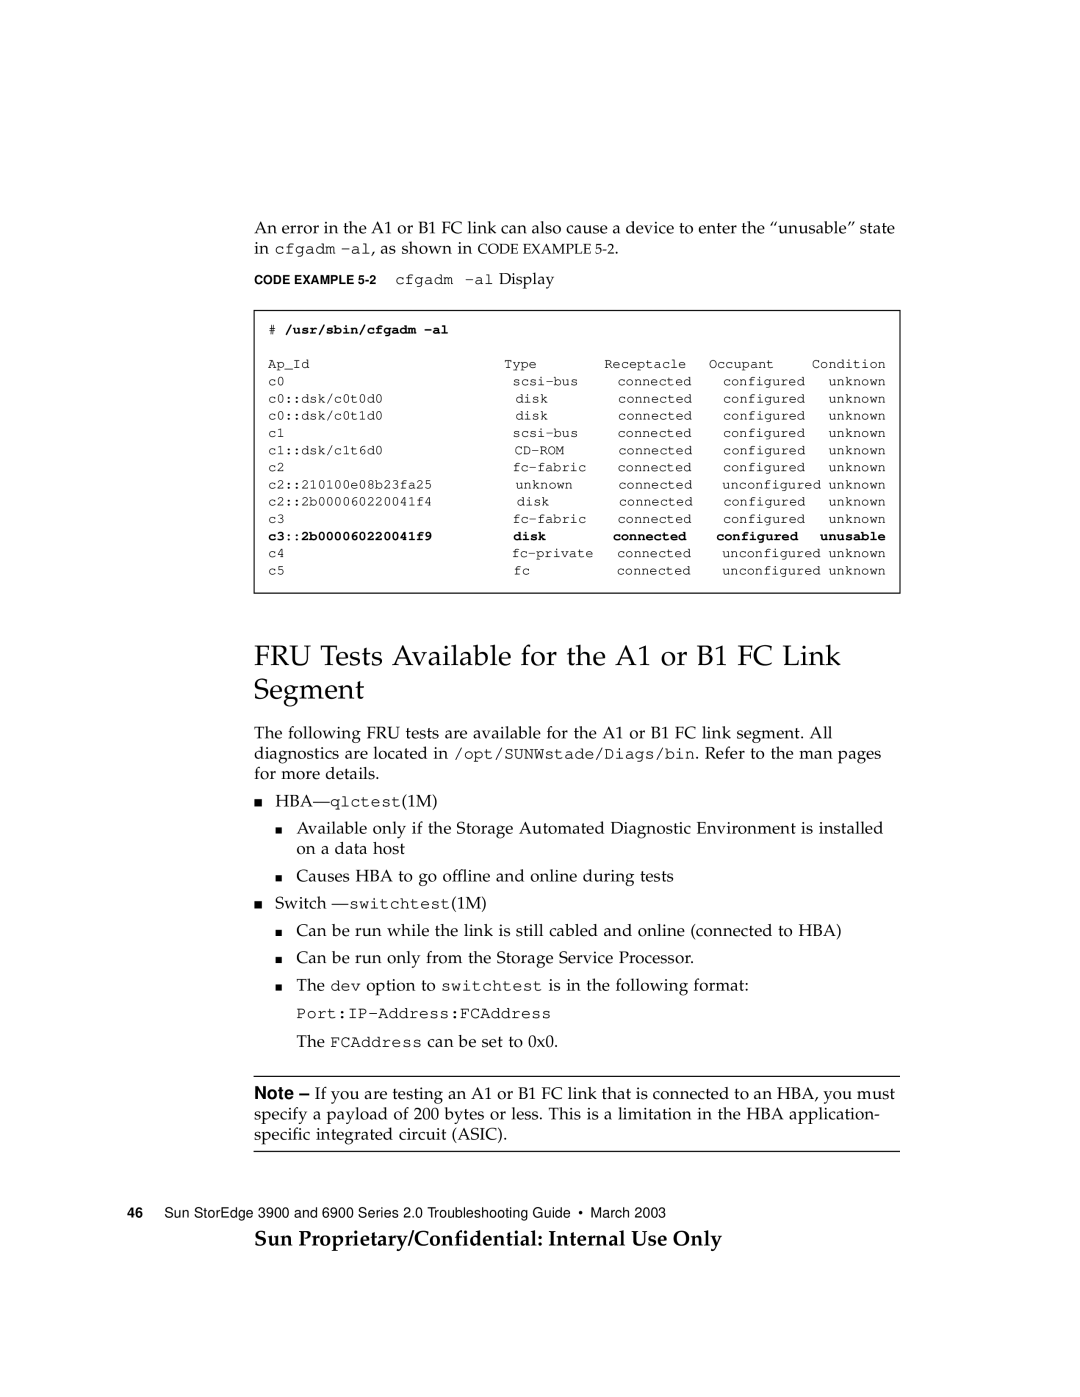 Sun Microsystems 3900 FRU Tests Available for the A1 or B1 FC Link Segment, Sun Proprietary/Confidential Internal Use Only 